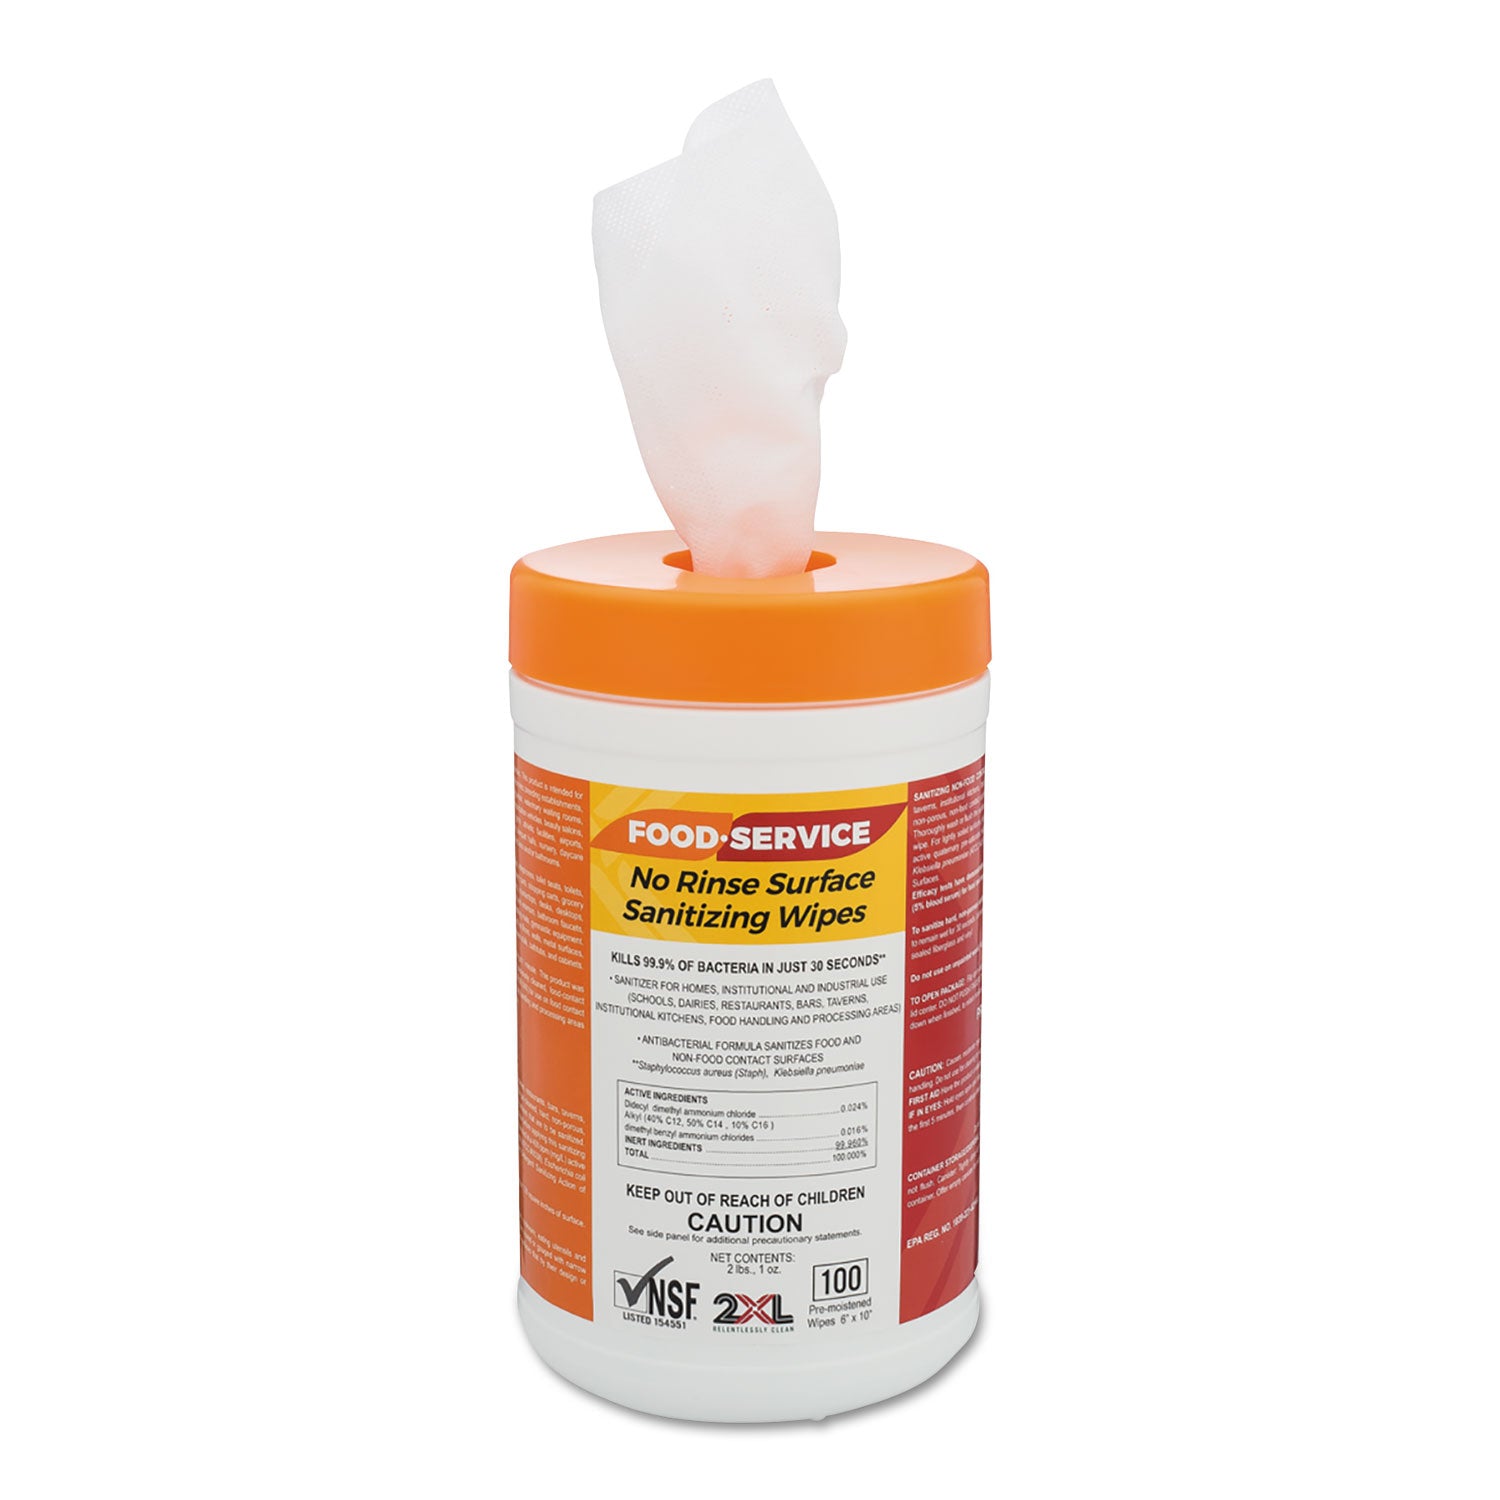 food-service-no-rinse-surface-sanitizing-wipes-1-ply-6-x-8-white-100-roll-6-rolls-carton_txl447 - 1